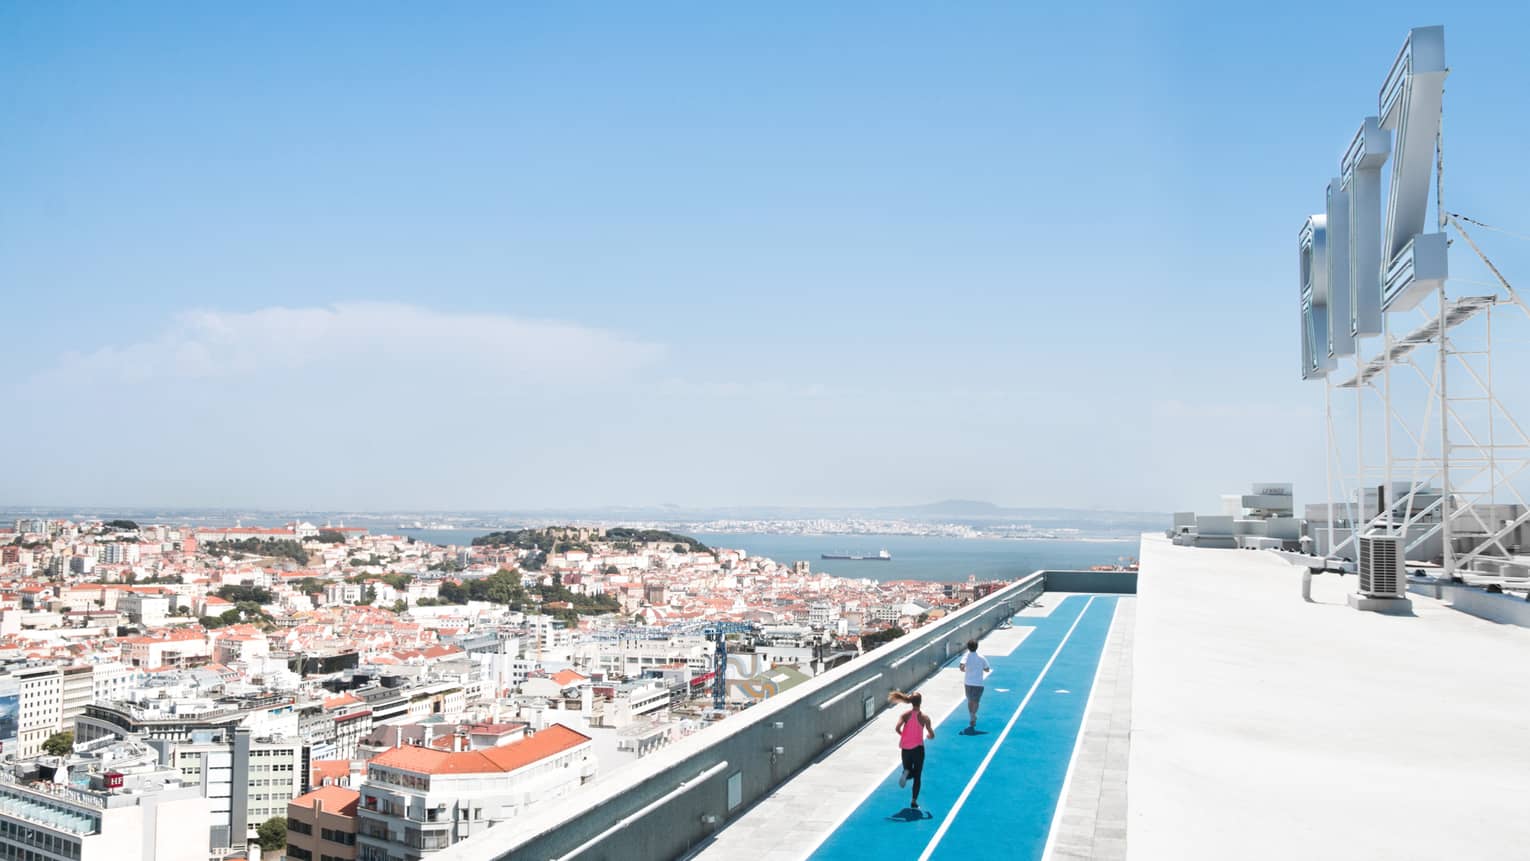 Aerial view of backs of man and woman running on blue rooftop outdoor track, Lisbon city roofs below